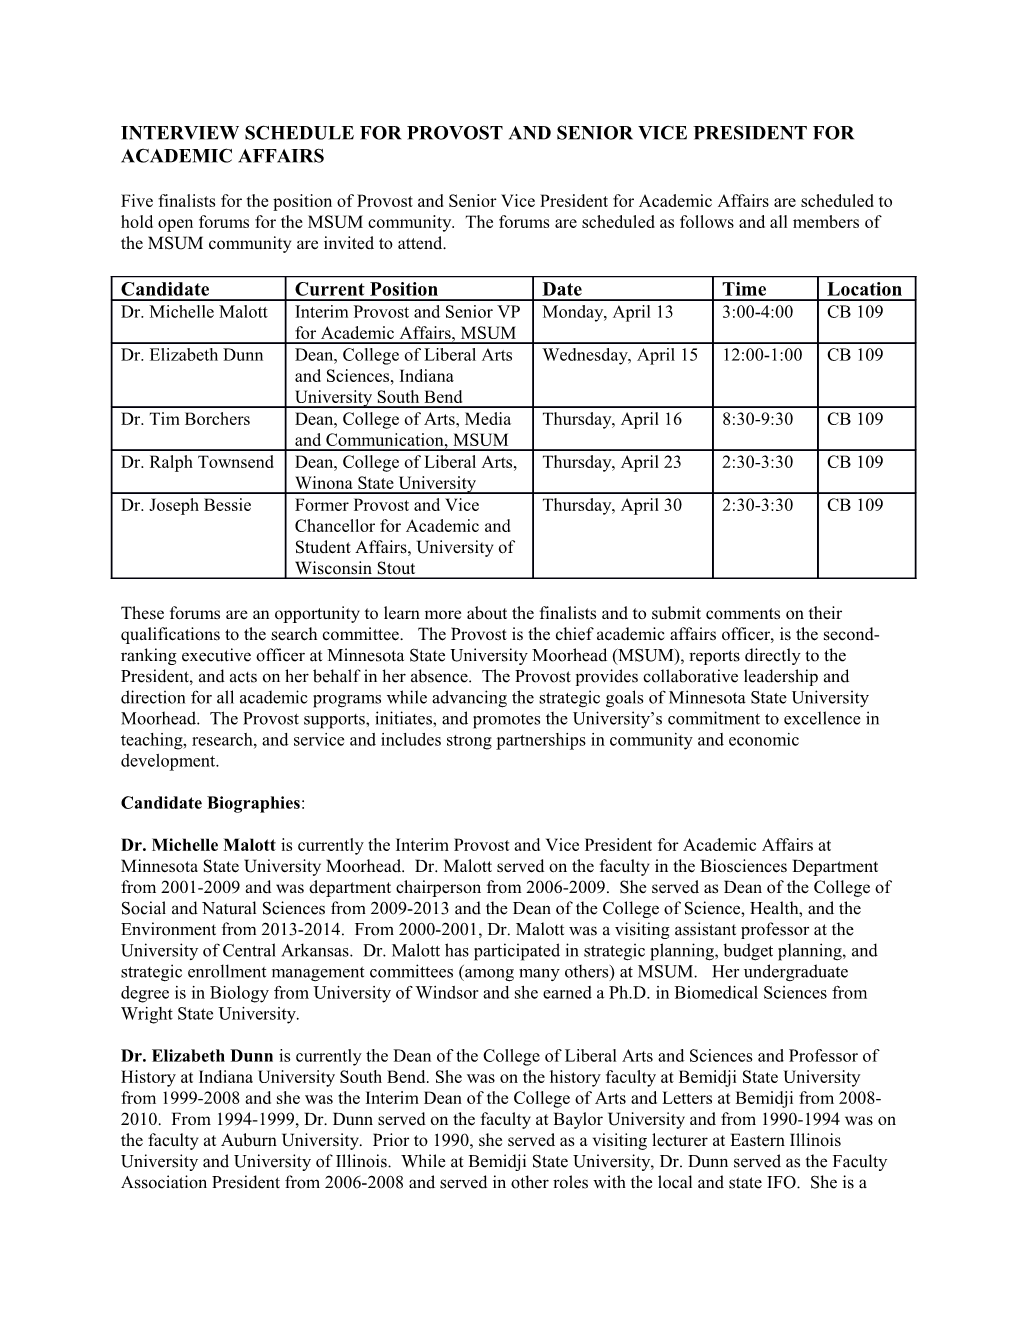 Interview Schedule for Provost and Senior Vice President for Academic Affairs